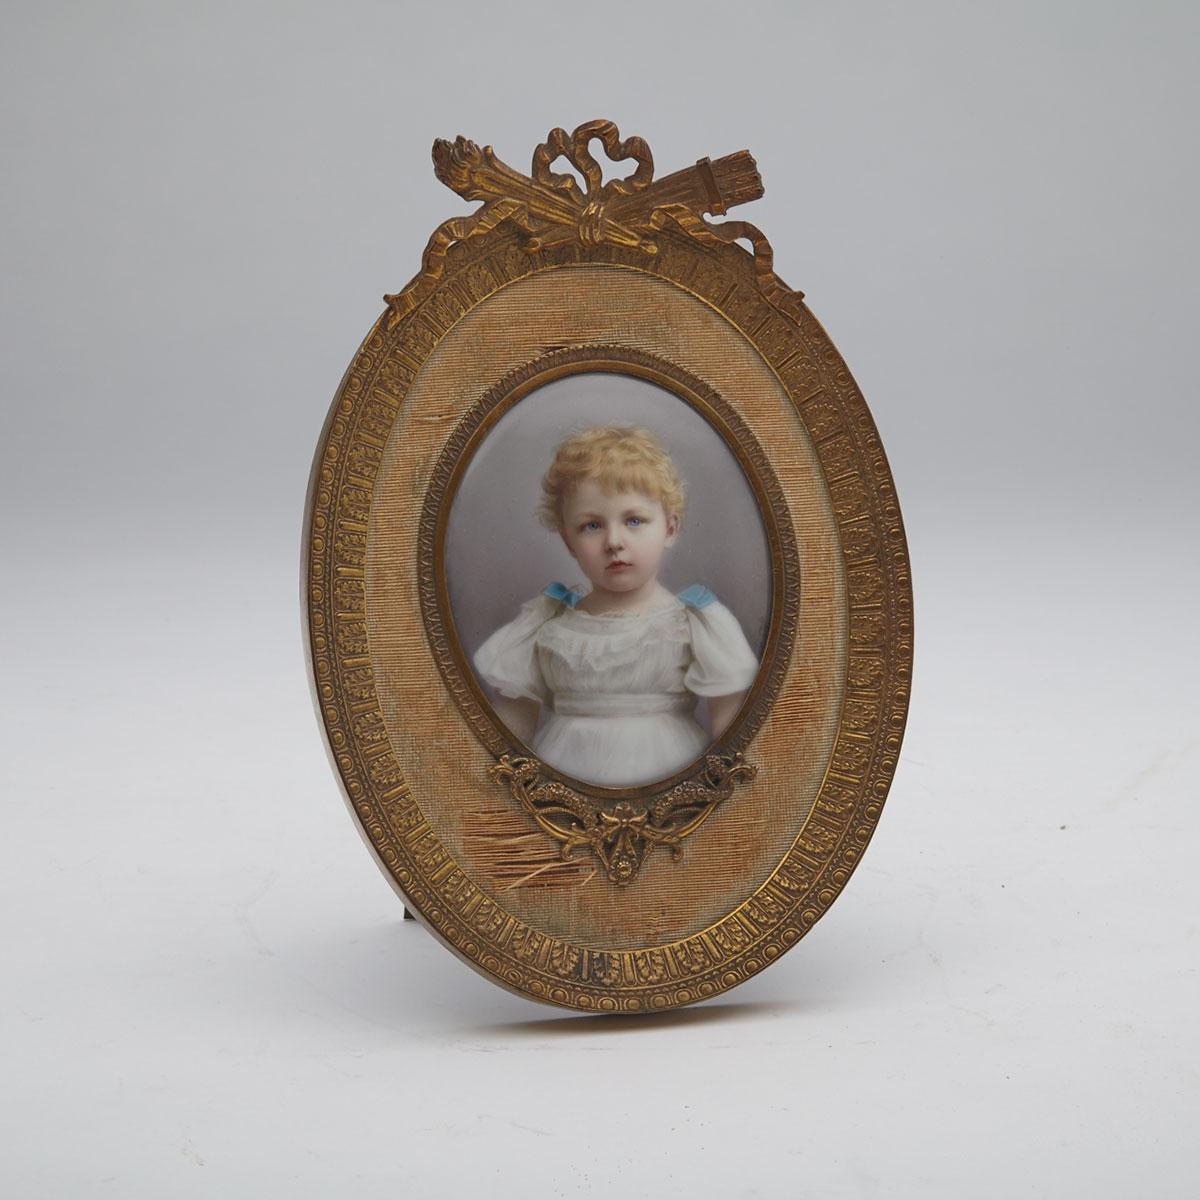 Dresden Porcelain Portrait Miniature of a Young Girl by Franz Till, 19th century